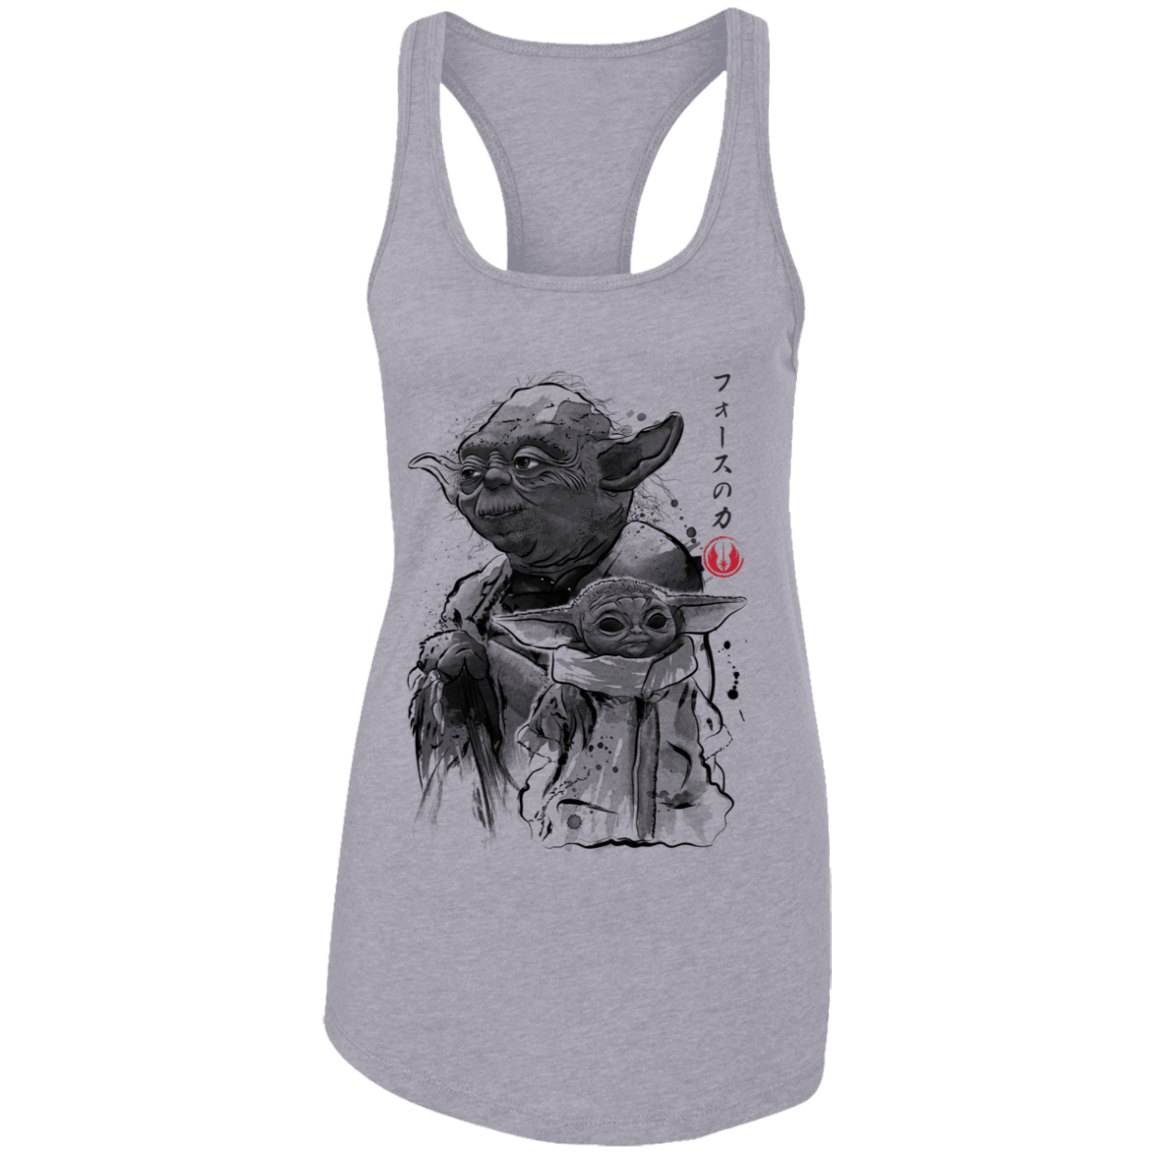 T-Shirts Heather Grey / X-Small Old and Young Women's Premium Racerback Tank